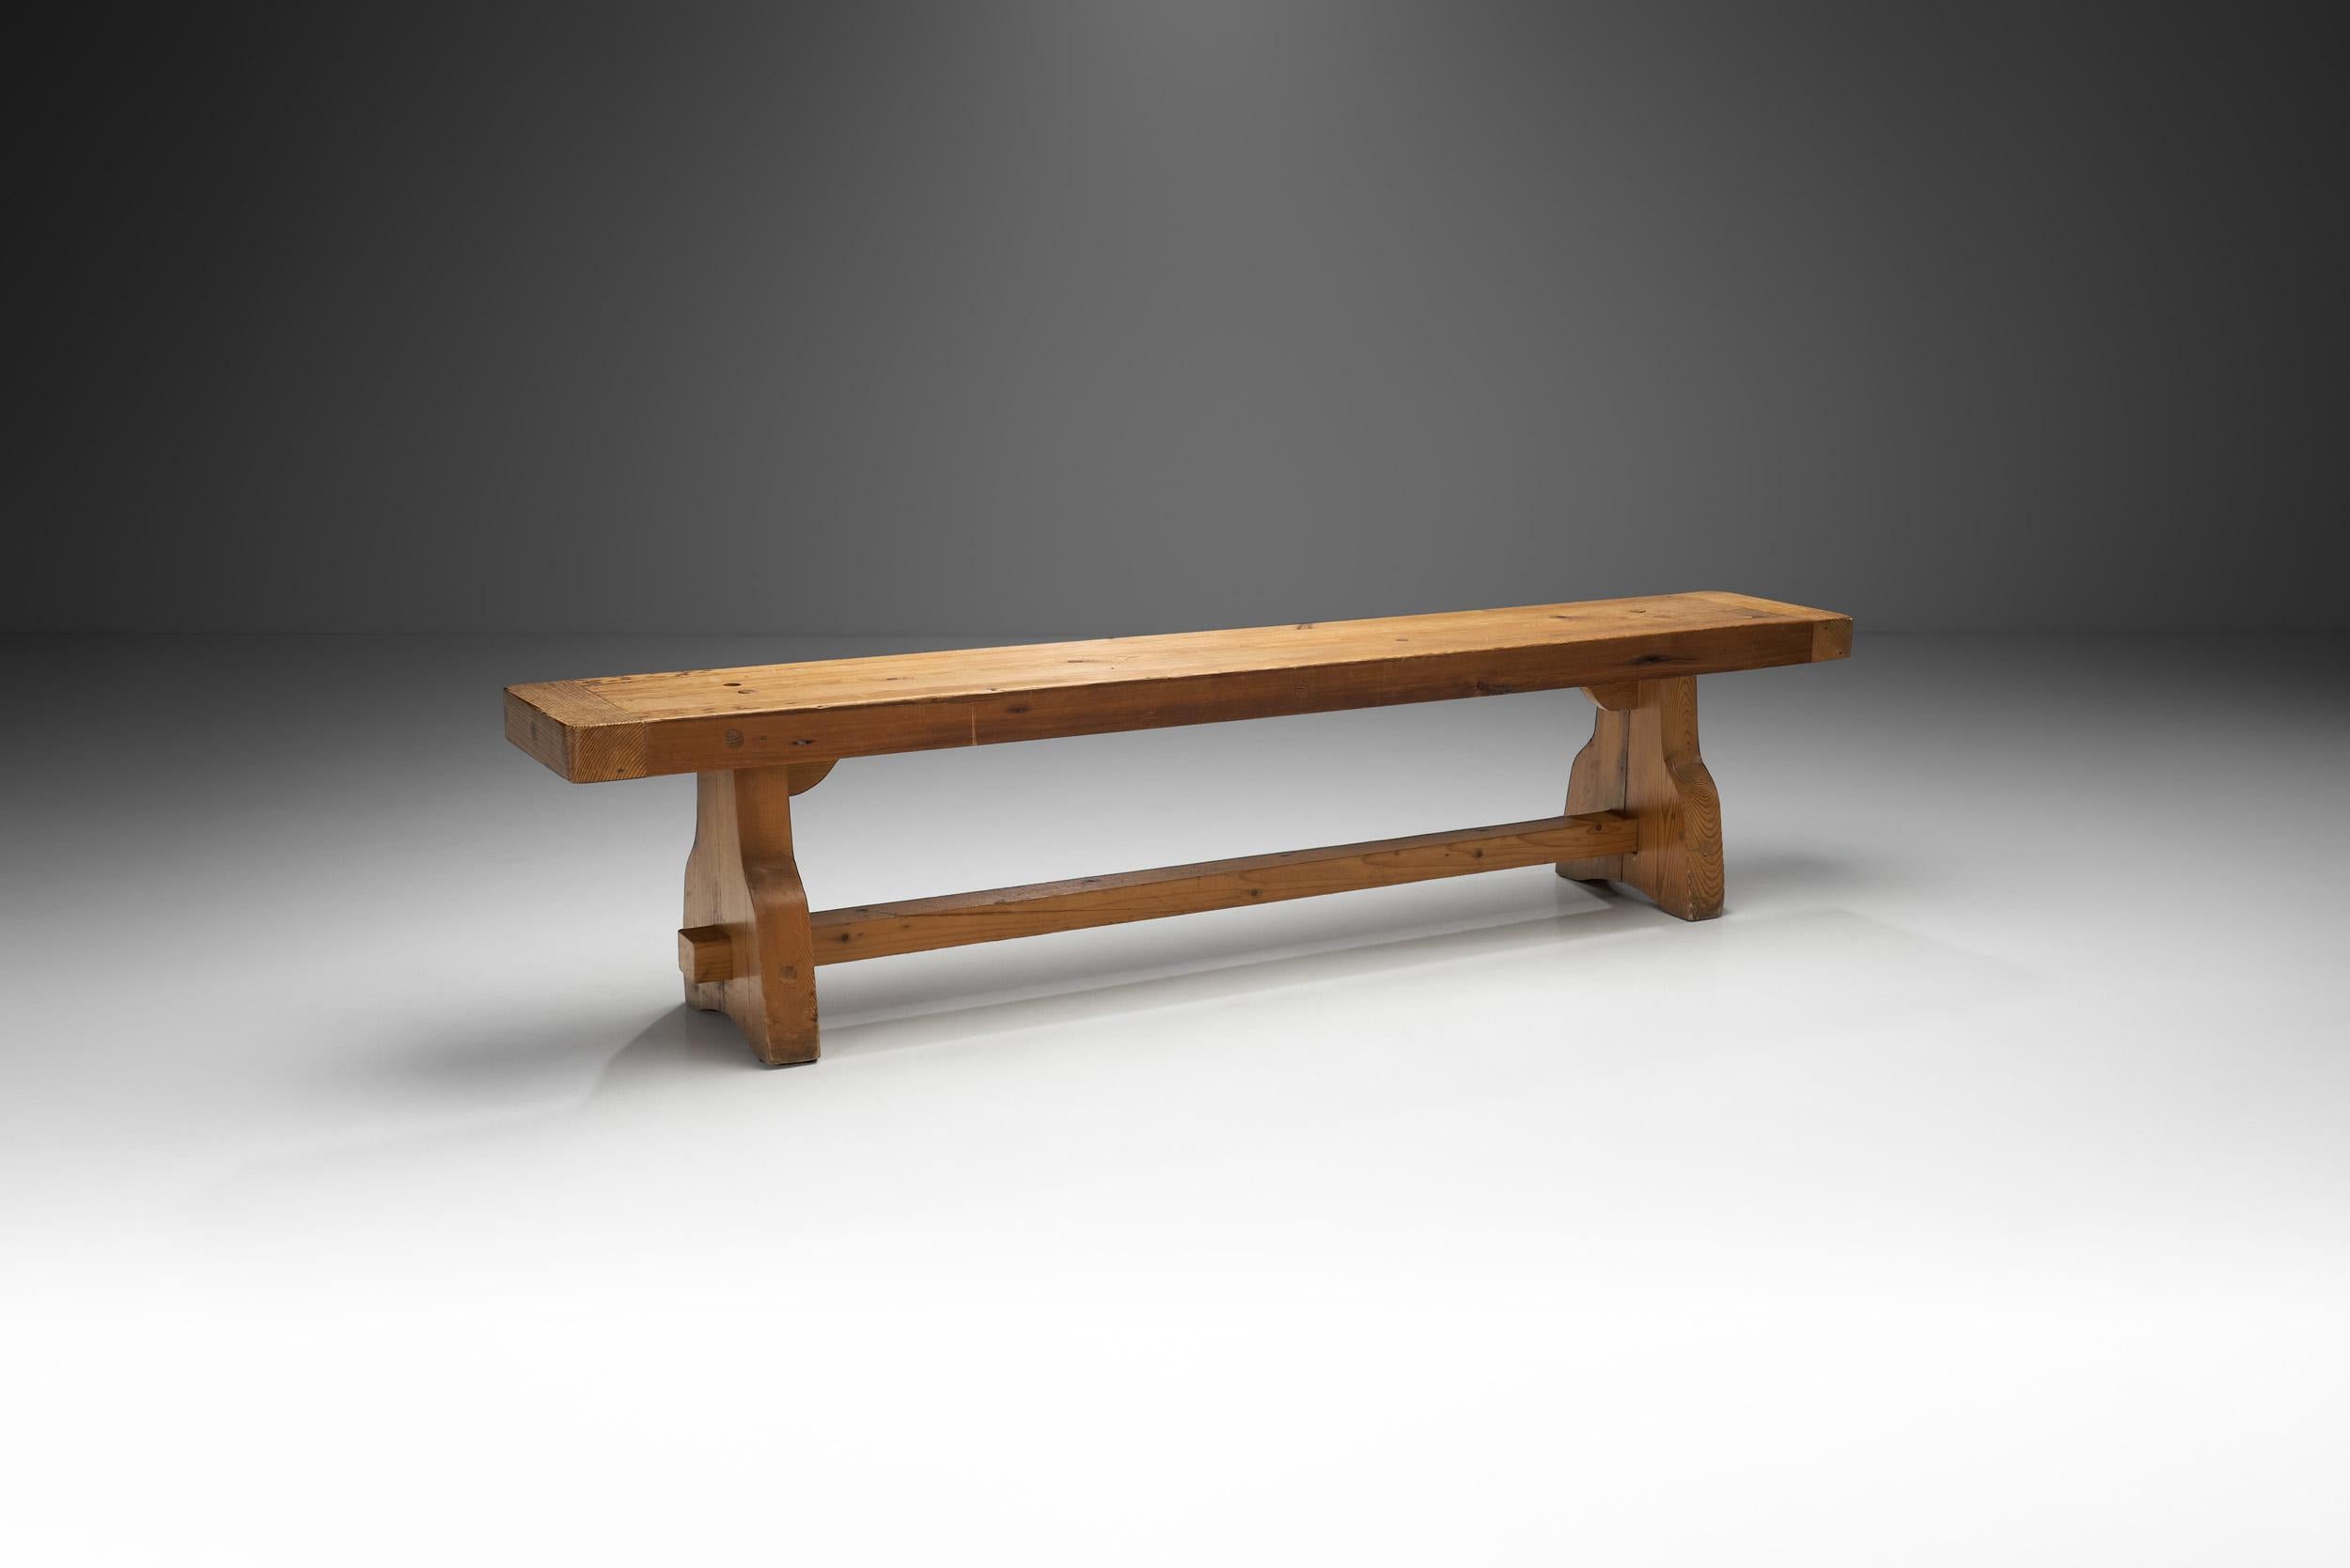 In European mid-century design, there was an early emphasis on wood as it connected everyday objects, such as furniture to nature. This rustic, solid oak wood bench is a perfect example of this sentiment, and of the visual benefits of an